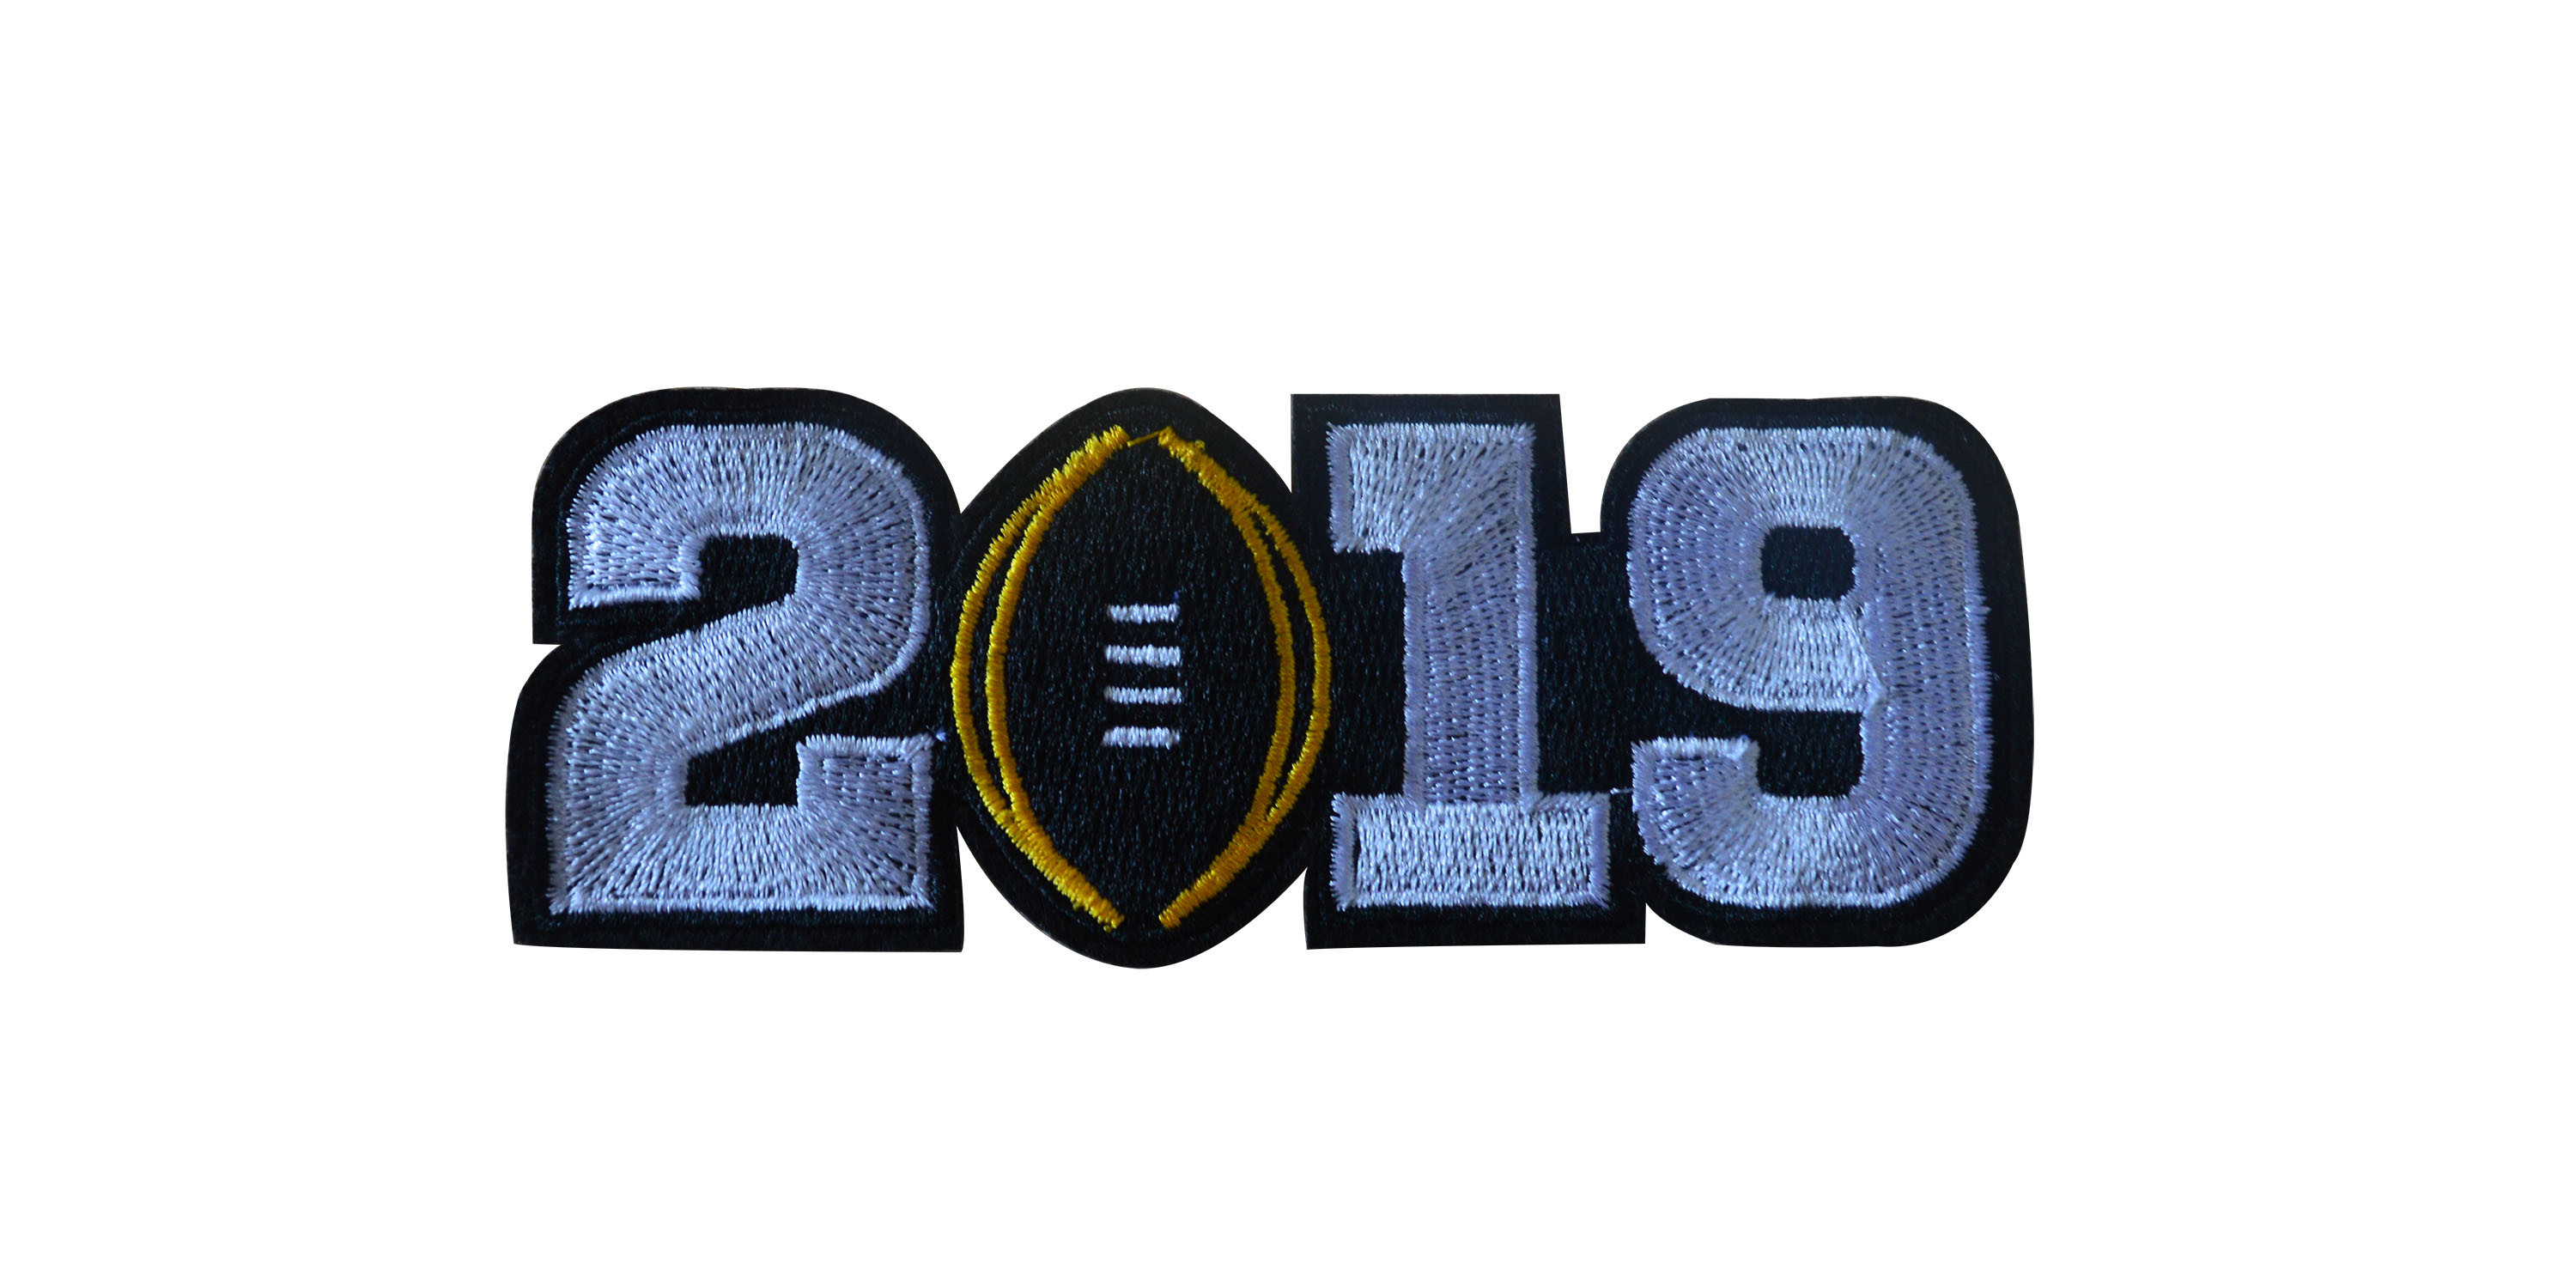 2019 College Football Playoff National Championship Patch White(Worn By Alabama)